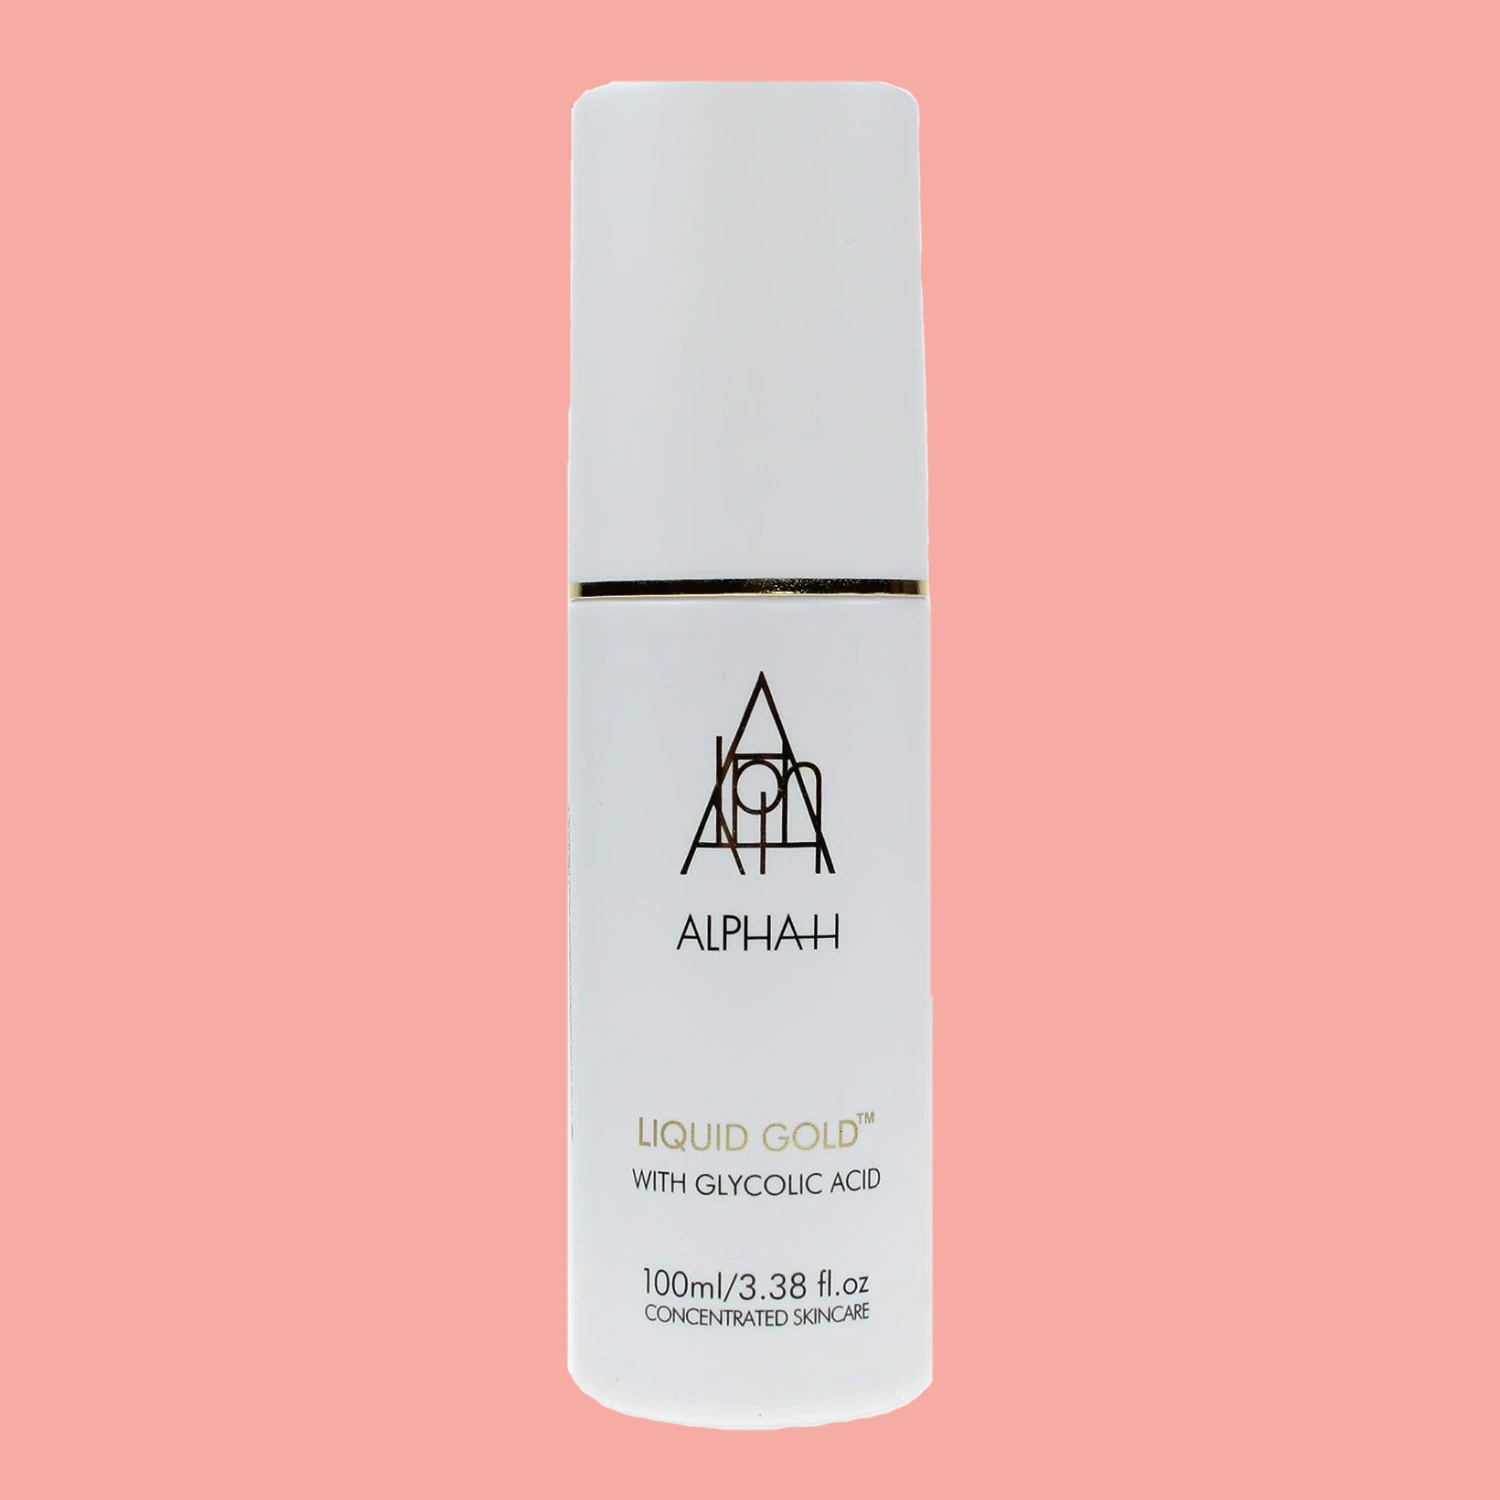 Bottle of Alpha-H Liquid Gold displayed against a neutral background, glycolic acid-based skin treatment for renewal and exfoliation.